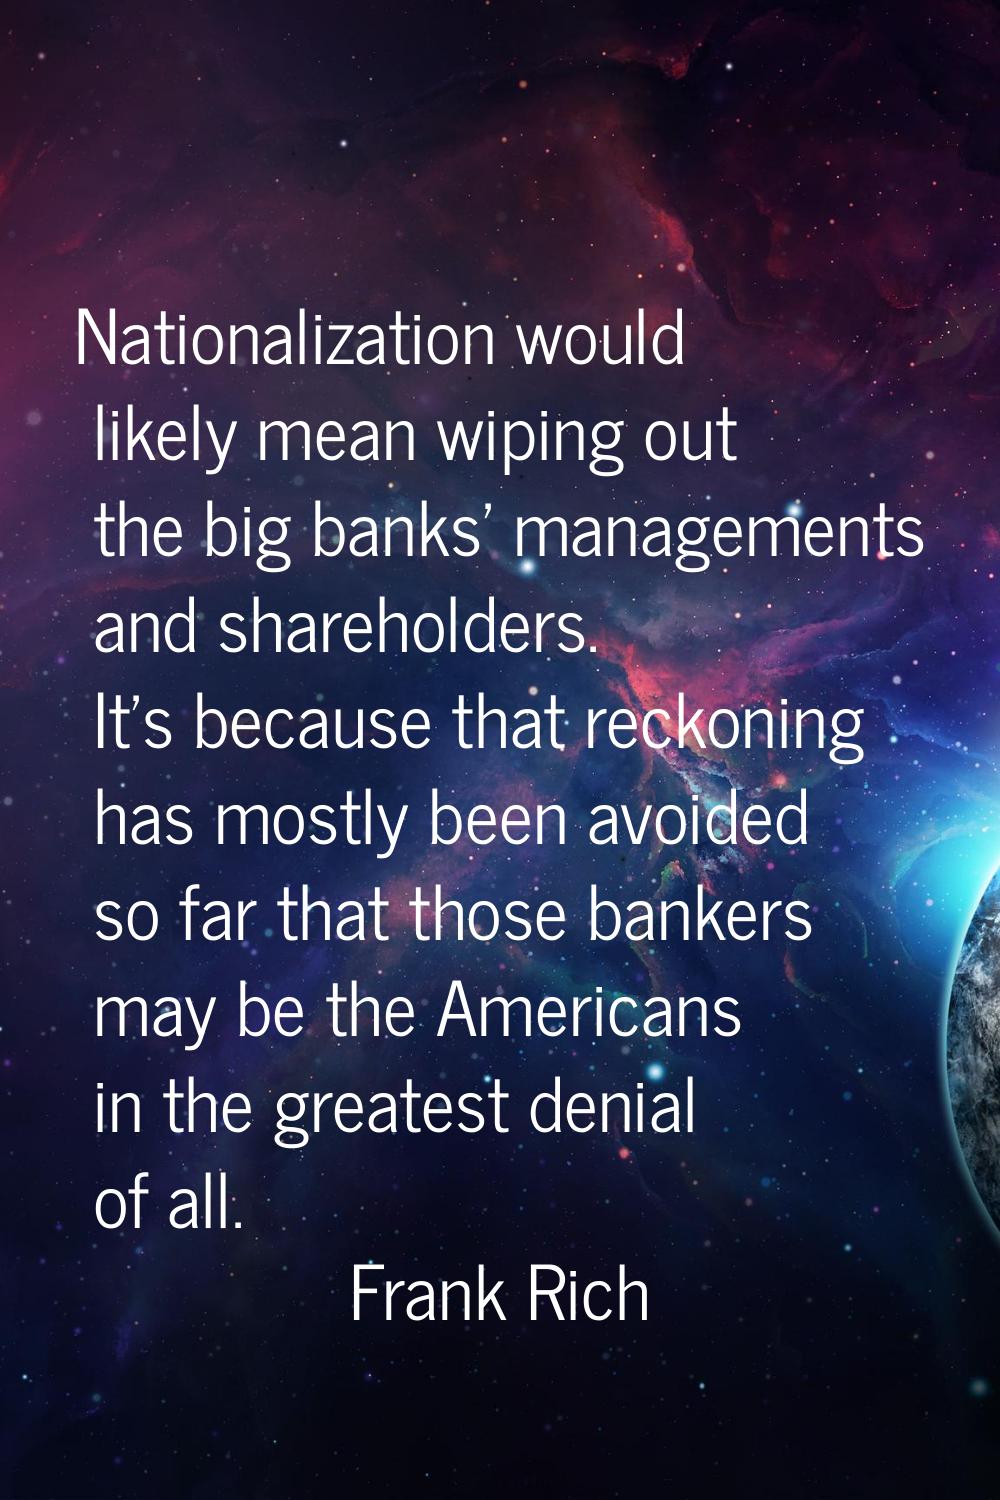 Nationalization would likely mean wiping out the big banks' managements and shareholders. It's beca